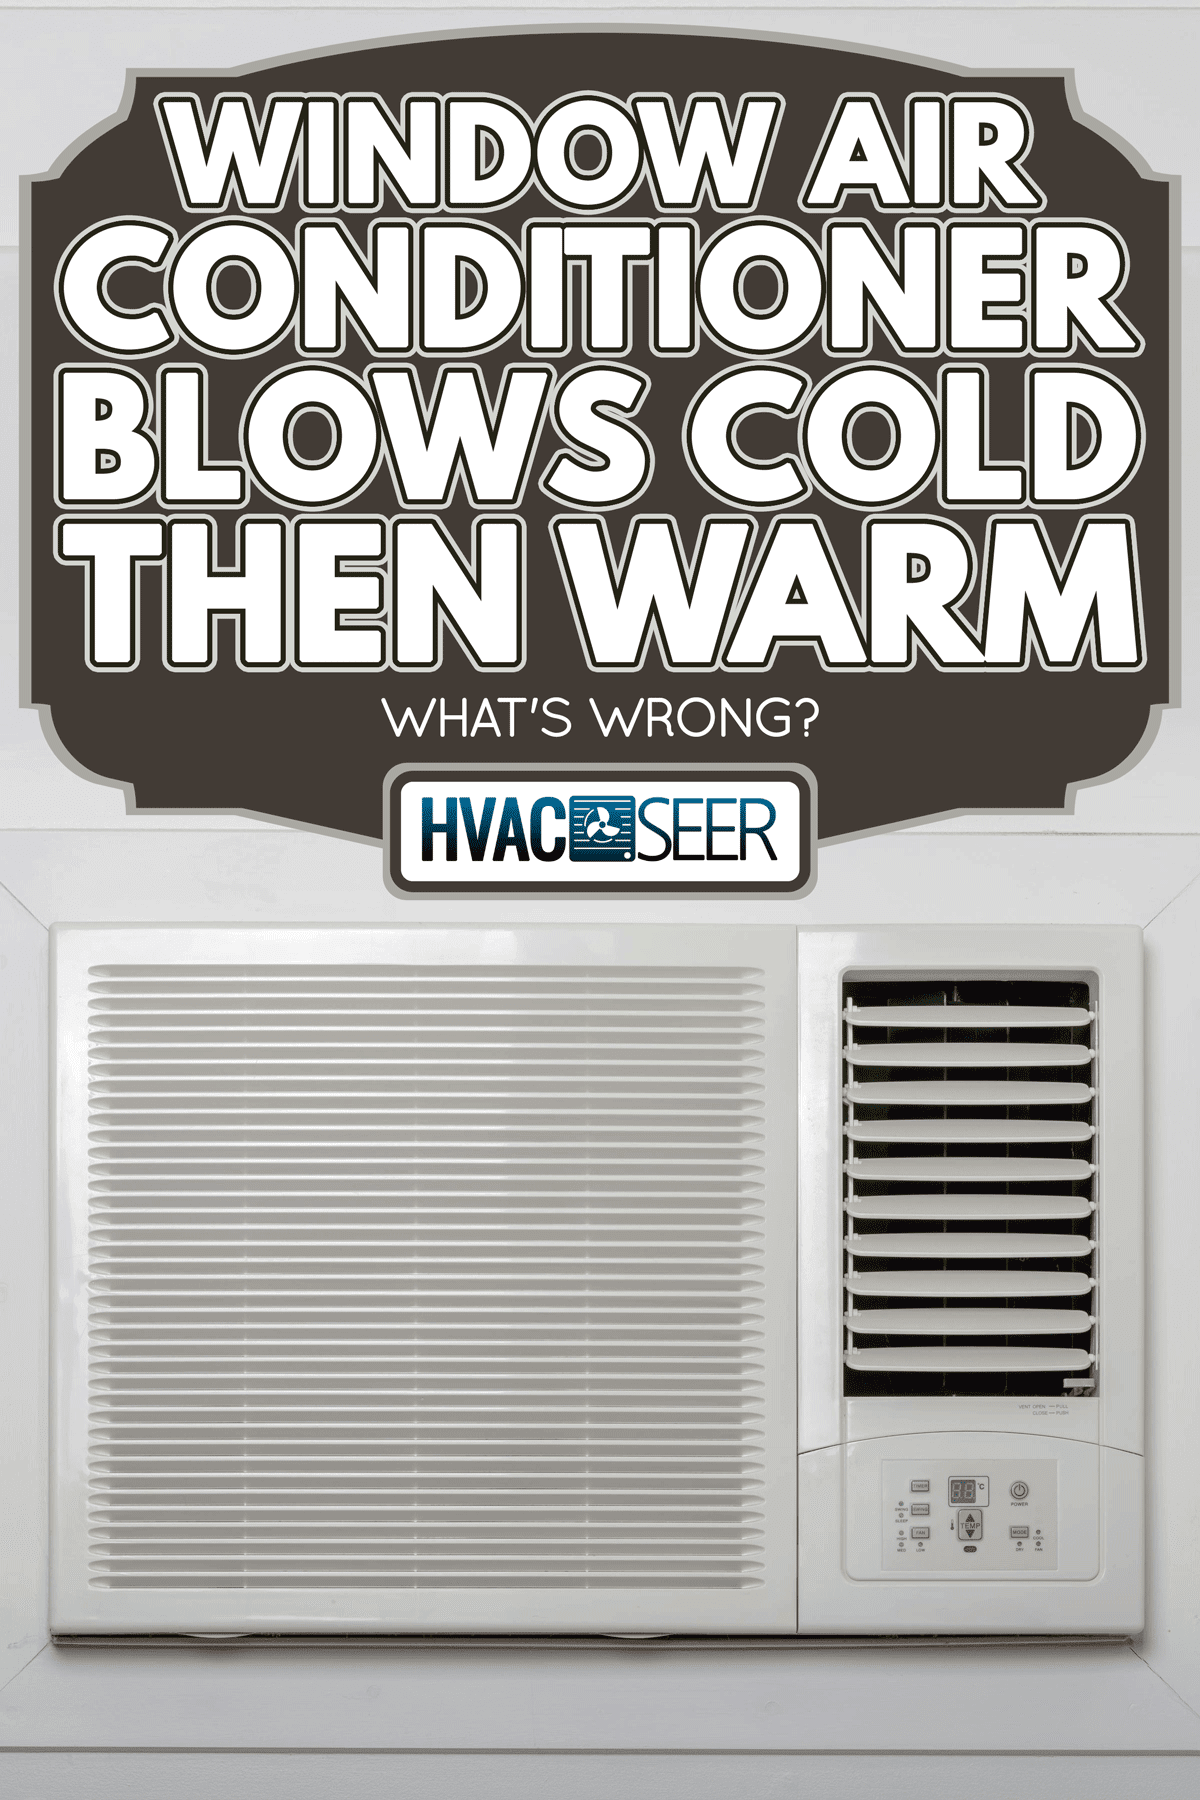 An old styled air conditioner on the wall, Window Air Conditioner Blows Cold Then Warm—What's Wrong?